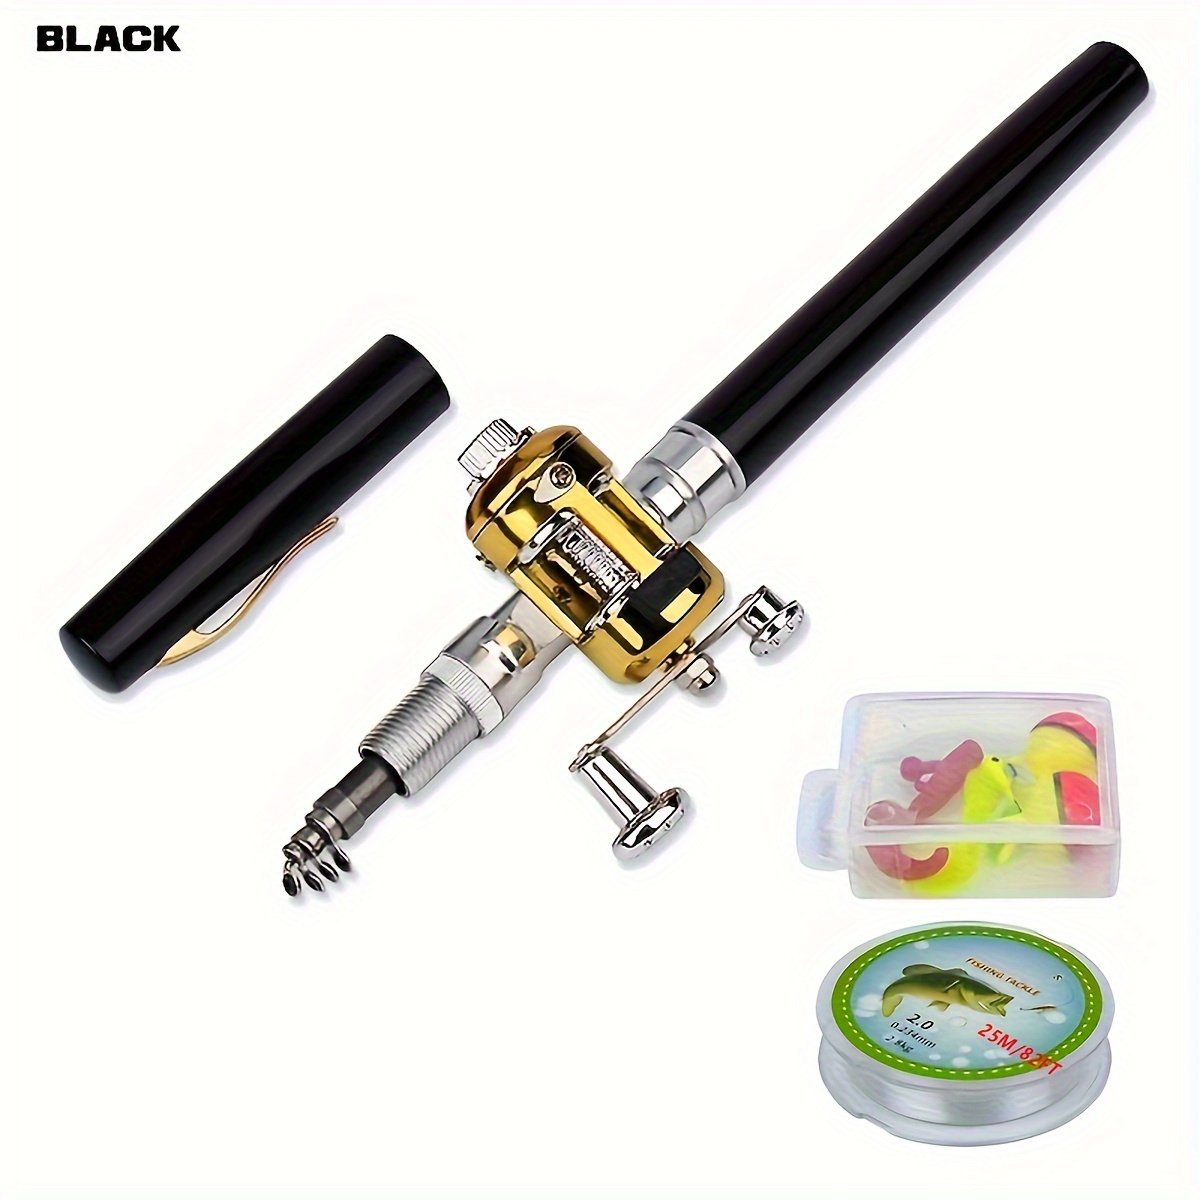 Loewten Mini Pen Shape Fishing Rod And Reel Combos, Pocket Fishing Rod With Reel  Portable For Sea Fishing For Rock Fishing For River Fishing 